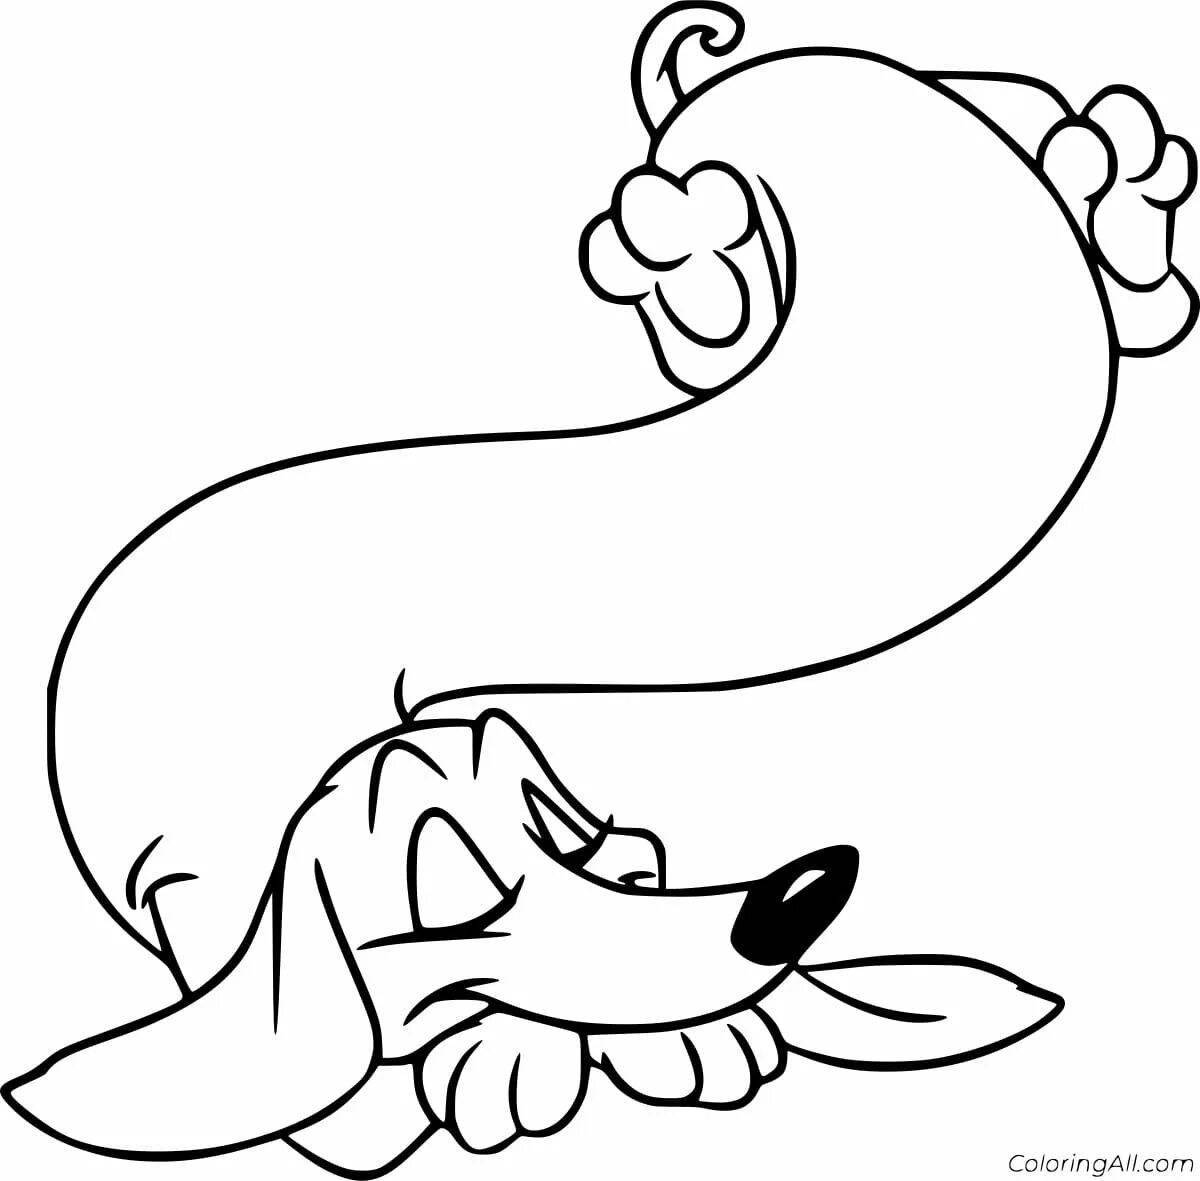 Exciting dachshund coloring page